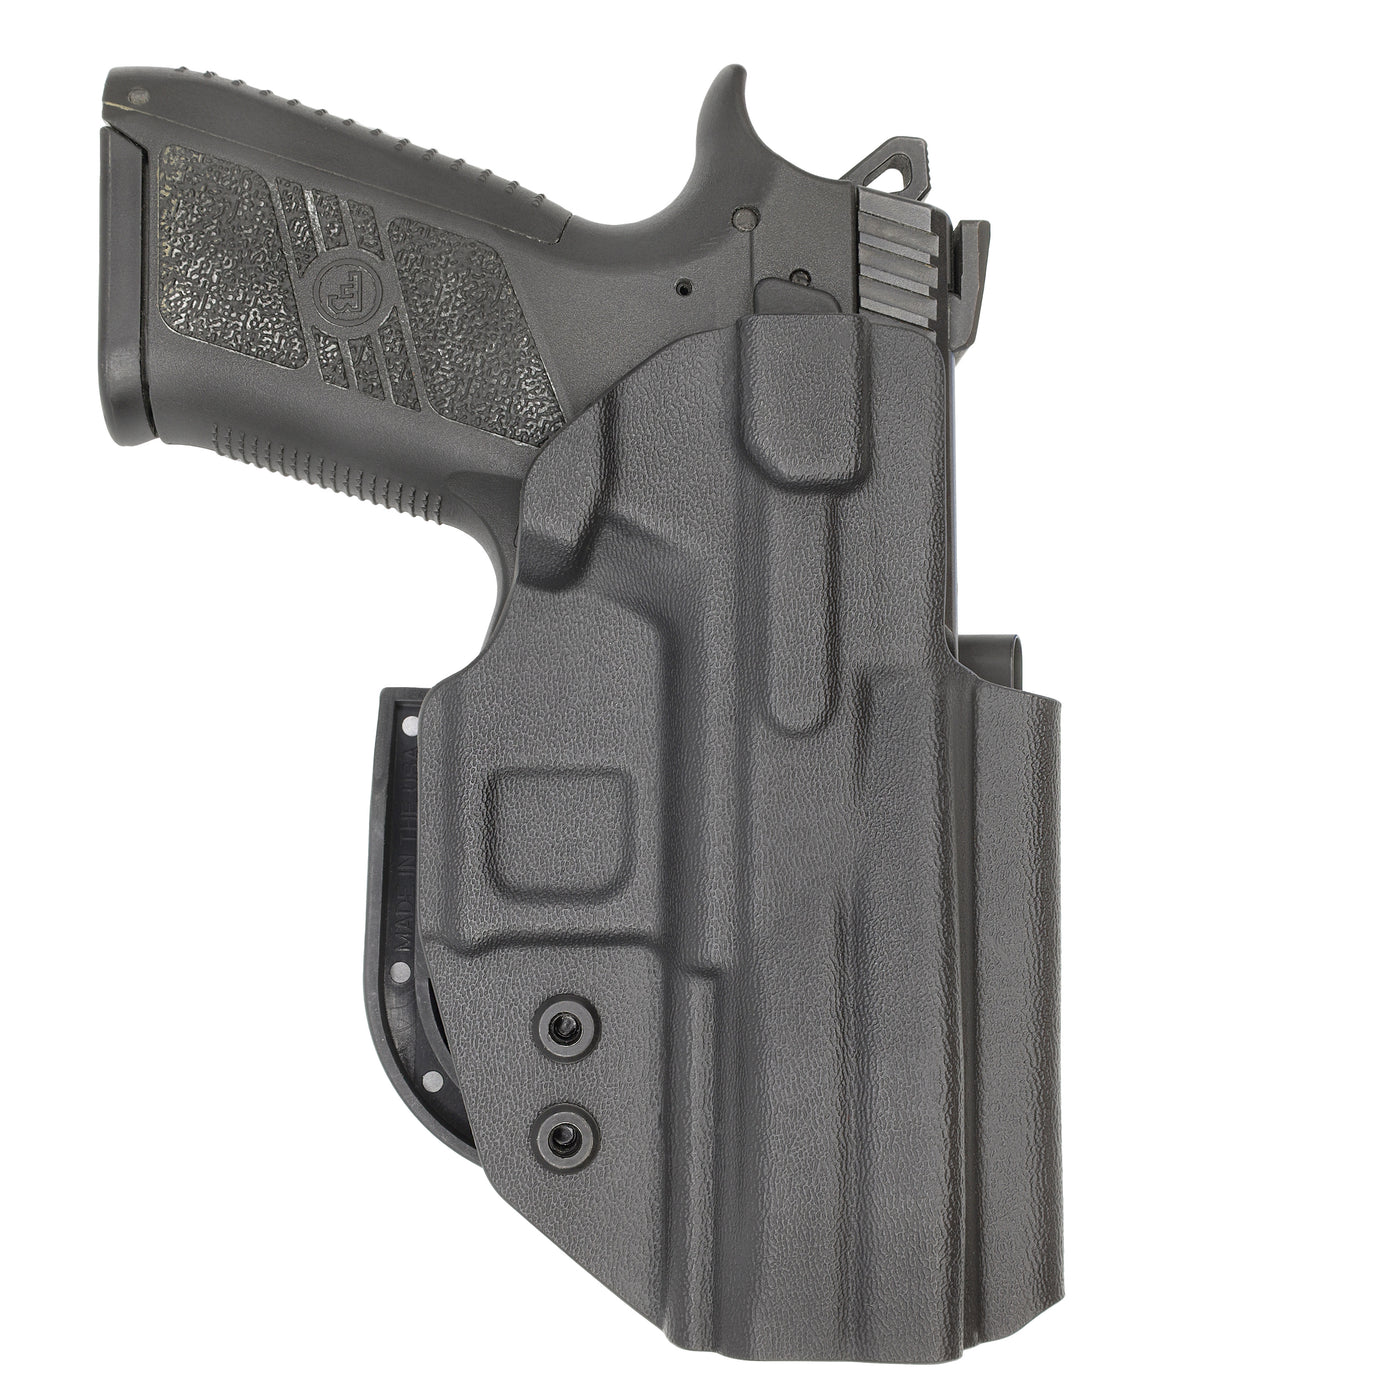 C&G Holsters Quickship IWB ALPHA UPGRADE Covert CZ P07 in holstered position LEFT HAND back view